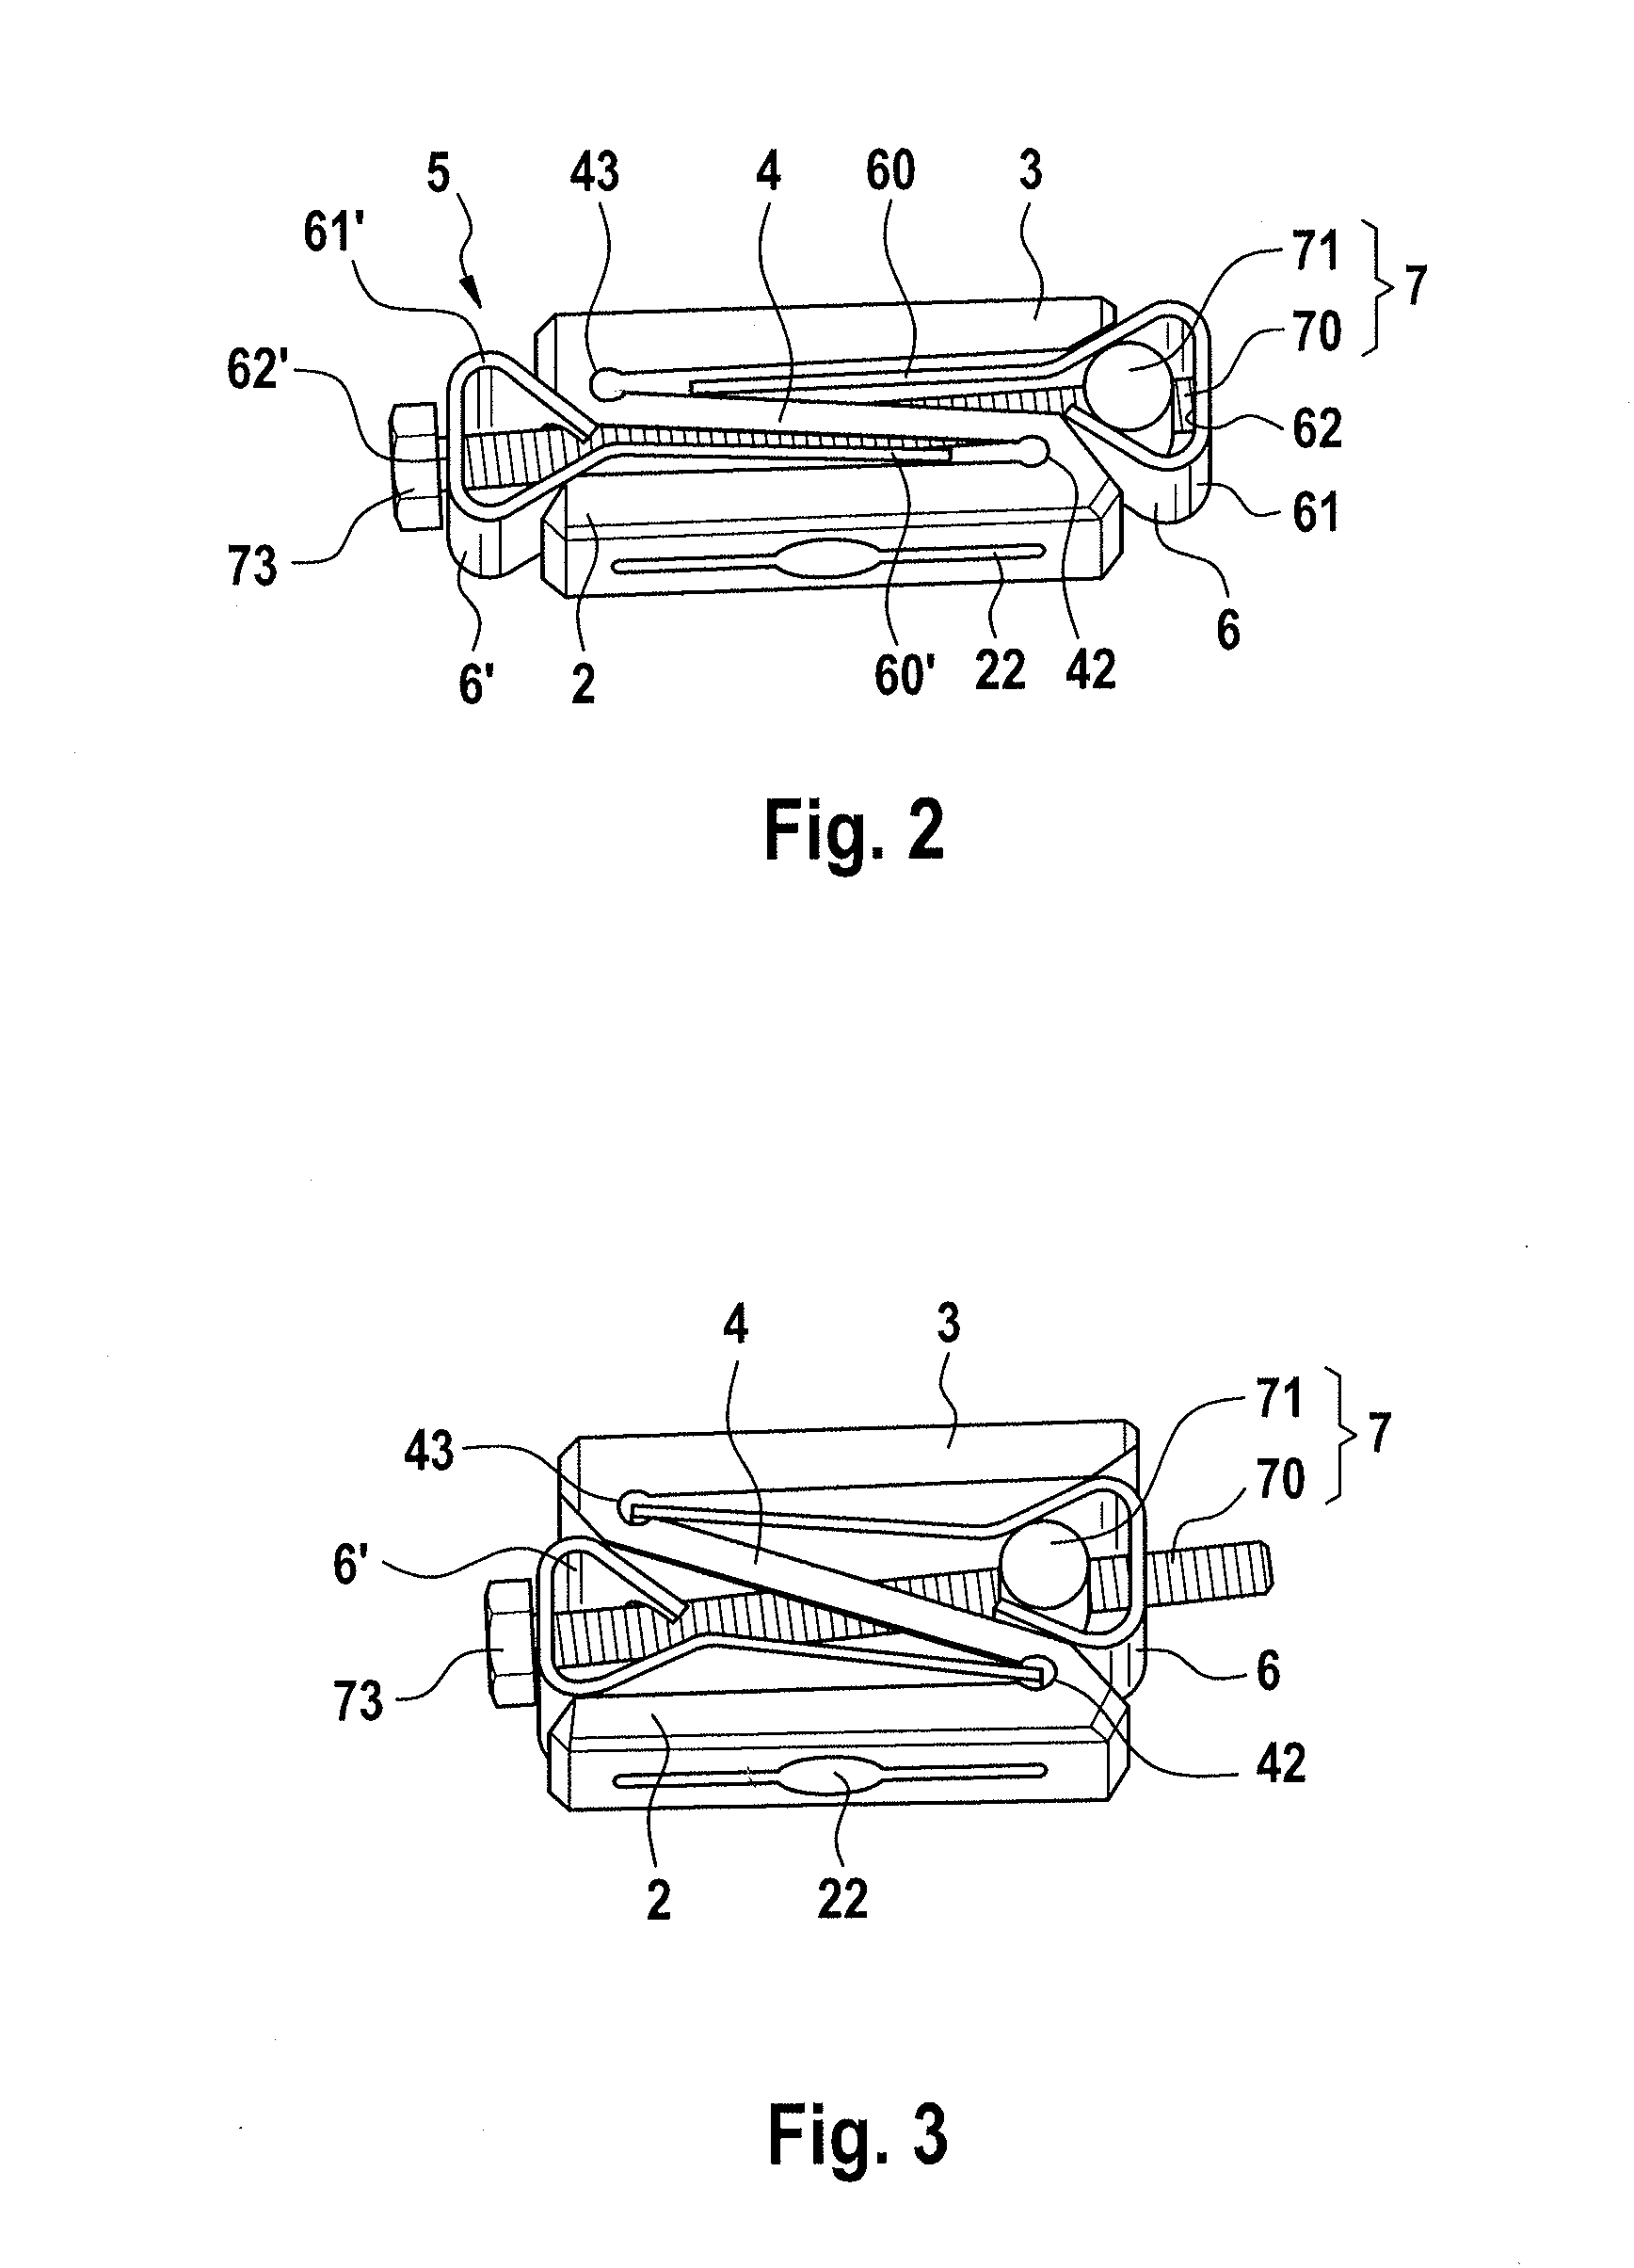 Continuously height-adjustable intervertebral fusion implant